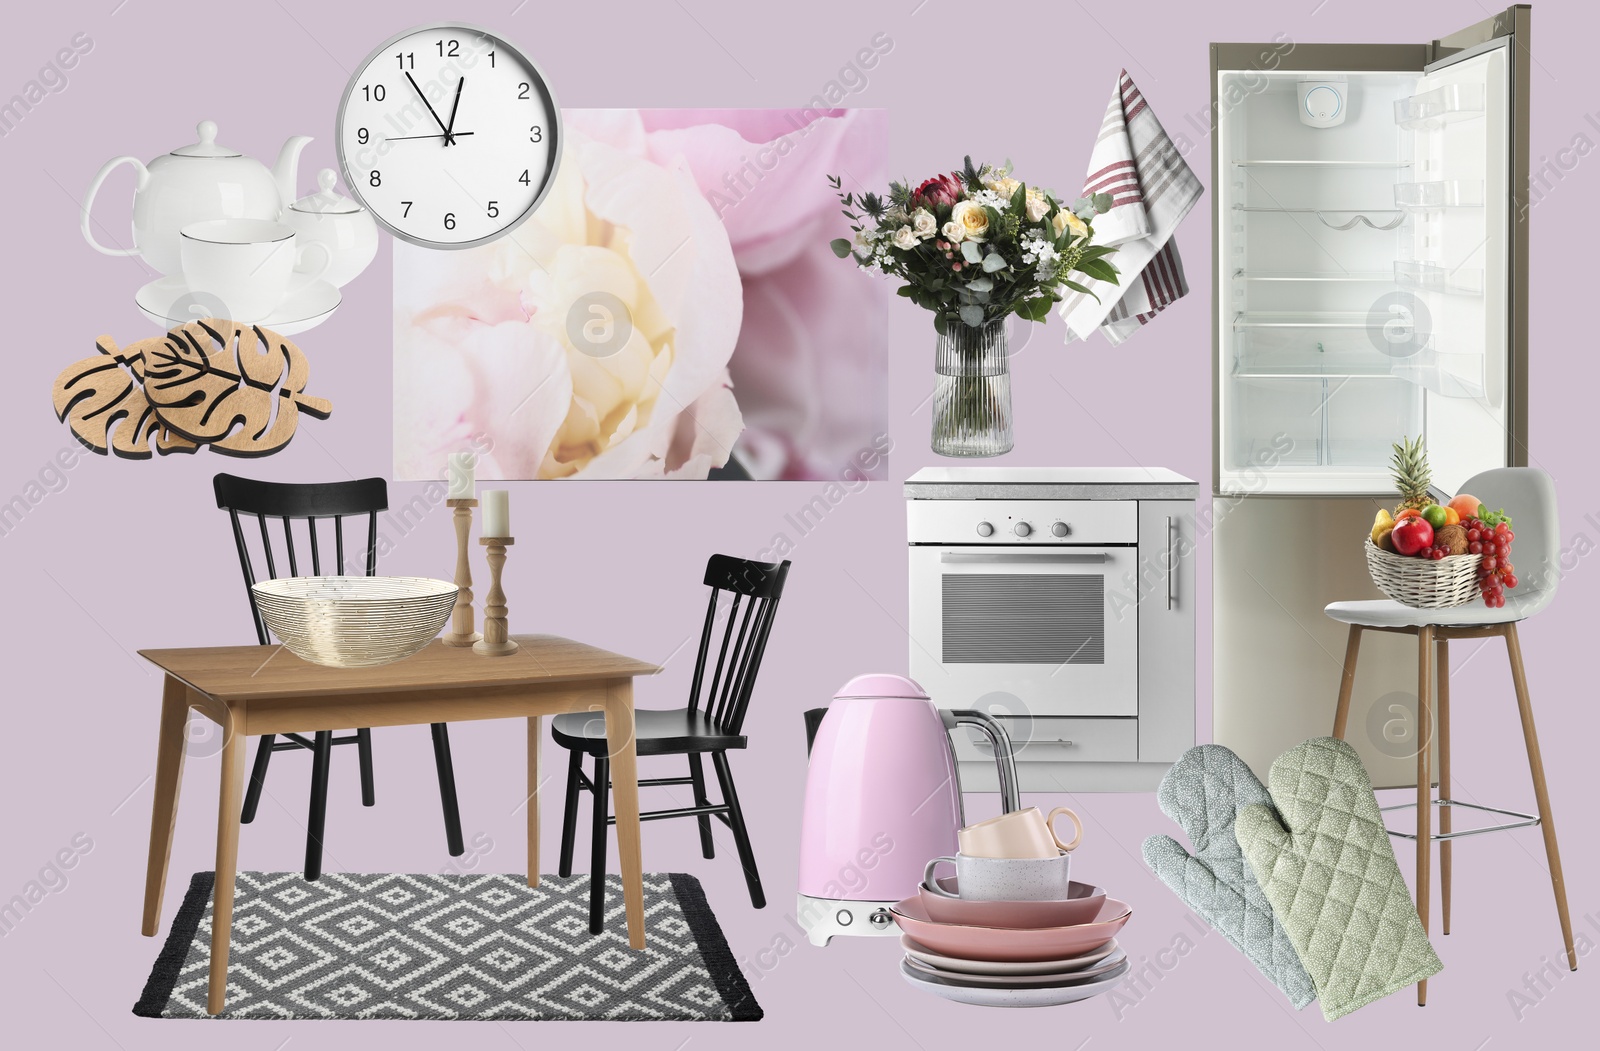 Image of Kitchen interior design. Collage with different combinable furniture and decorative elements on pale pink background